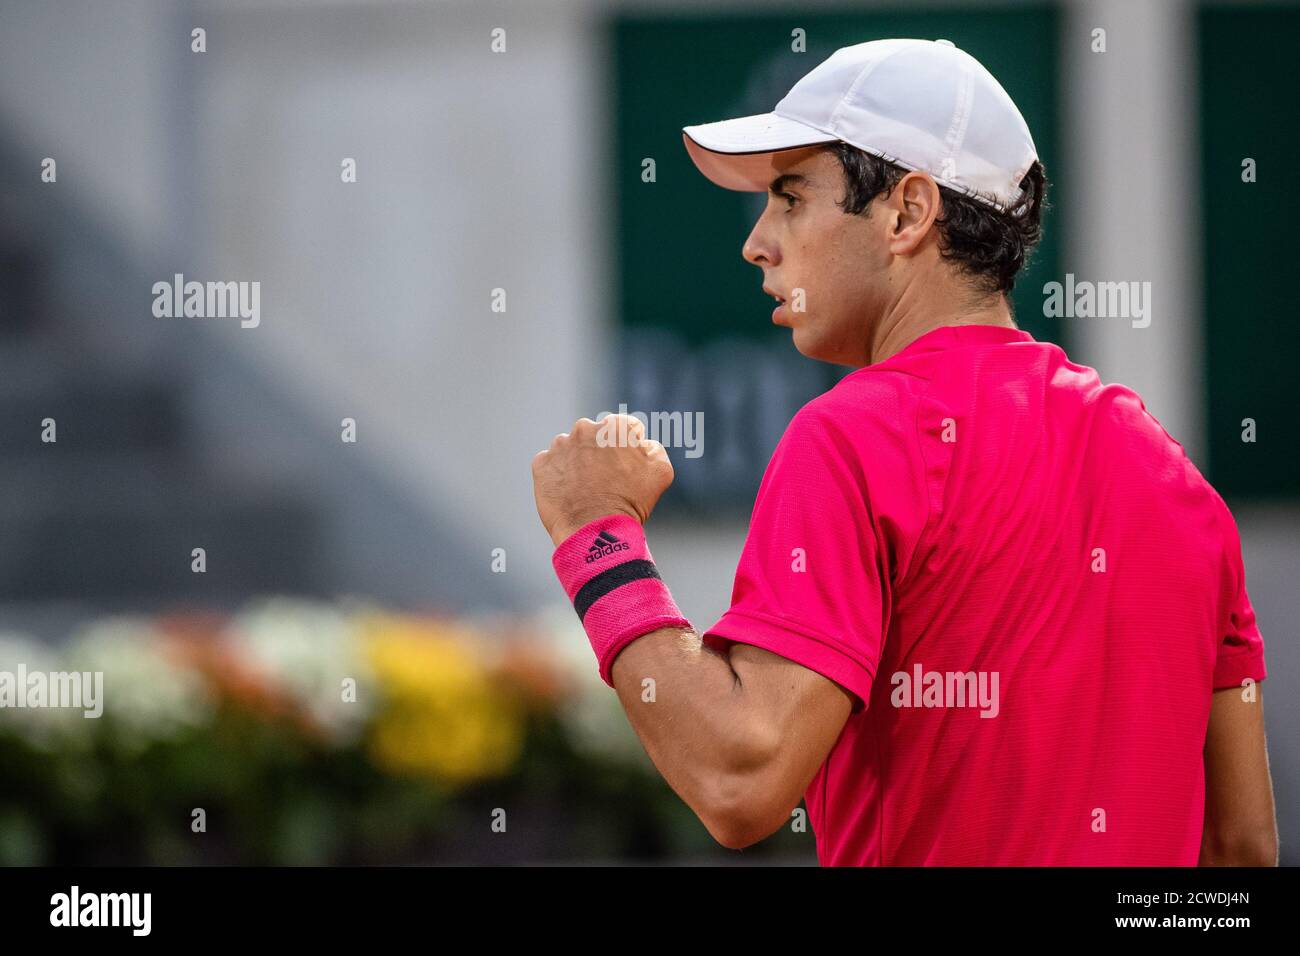 Paris, France. 29th Sep, 2020. Jaume Munar reacts during the men's singles first round match between Stefanos Tsitsipas of Greece and Jaume Munar of Spain in the French Open tennis tournament 2020 at Roland Garros in Paris, France, Sept. 29, 2020. Credit: Aurelien Morissard/Xinhua/Alamy Live News Stock Photo